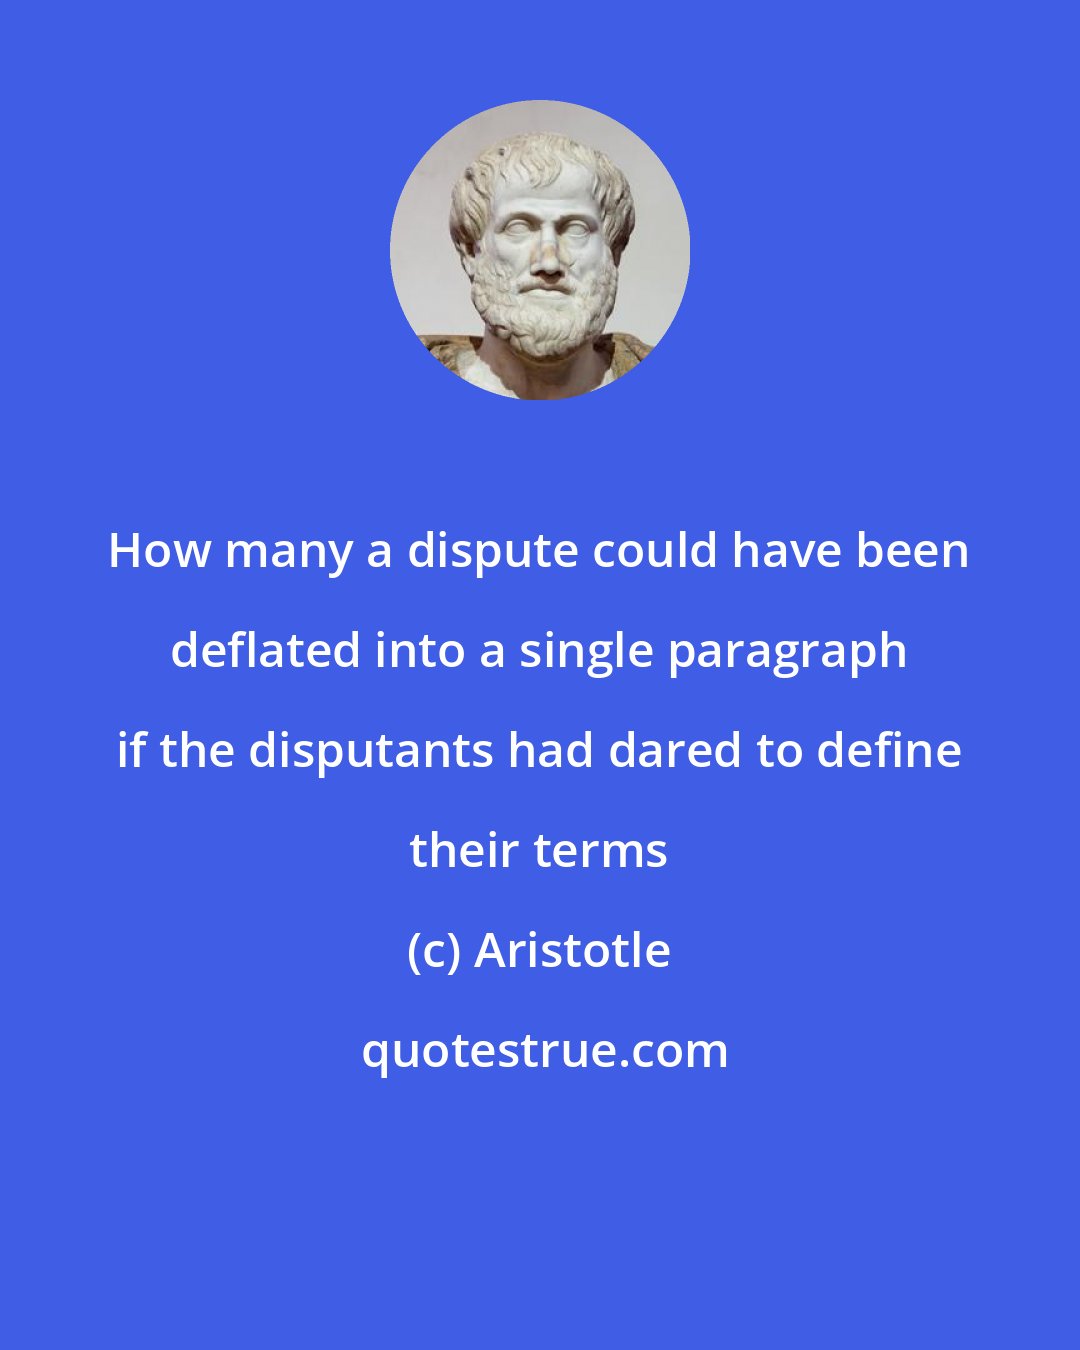 Aristotle: How many a dispute could have been deflated into a single paragraph if the disputants had dared to define their terms